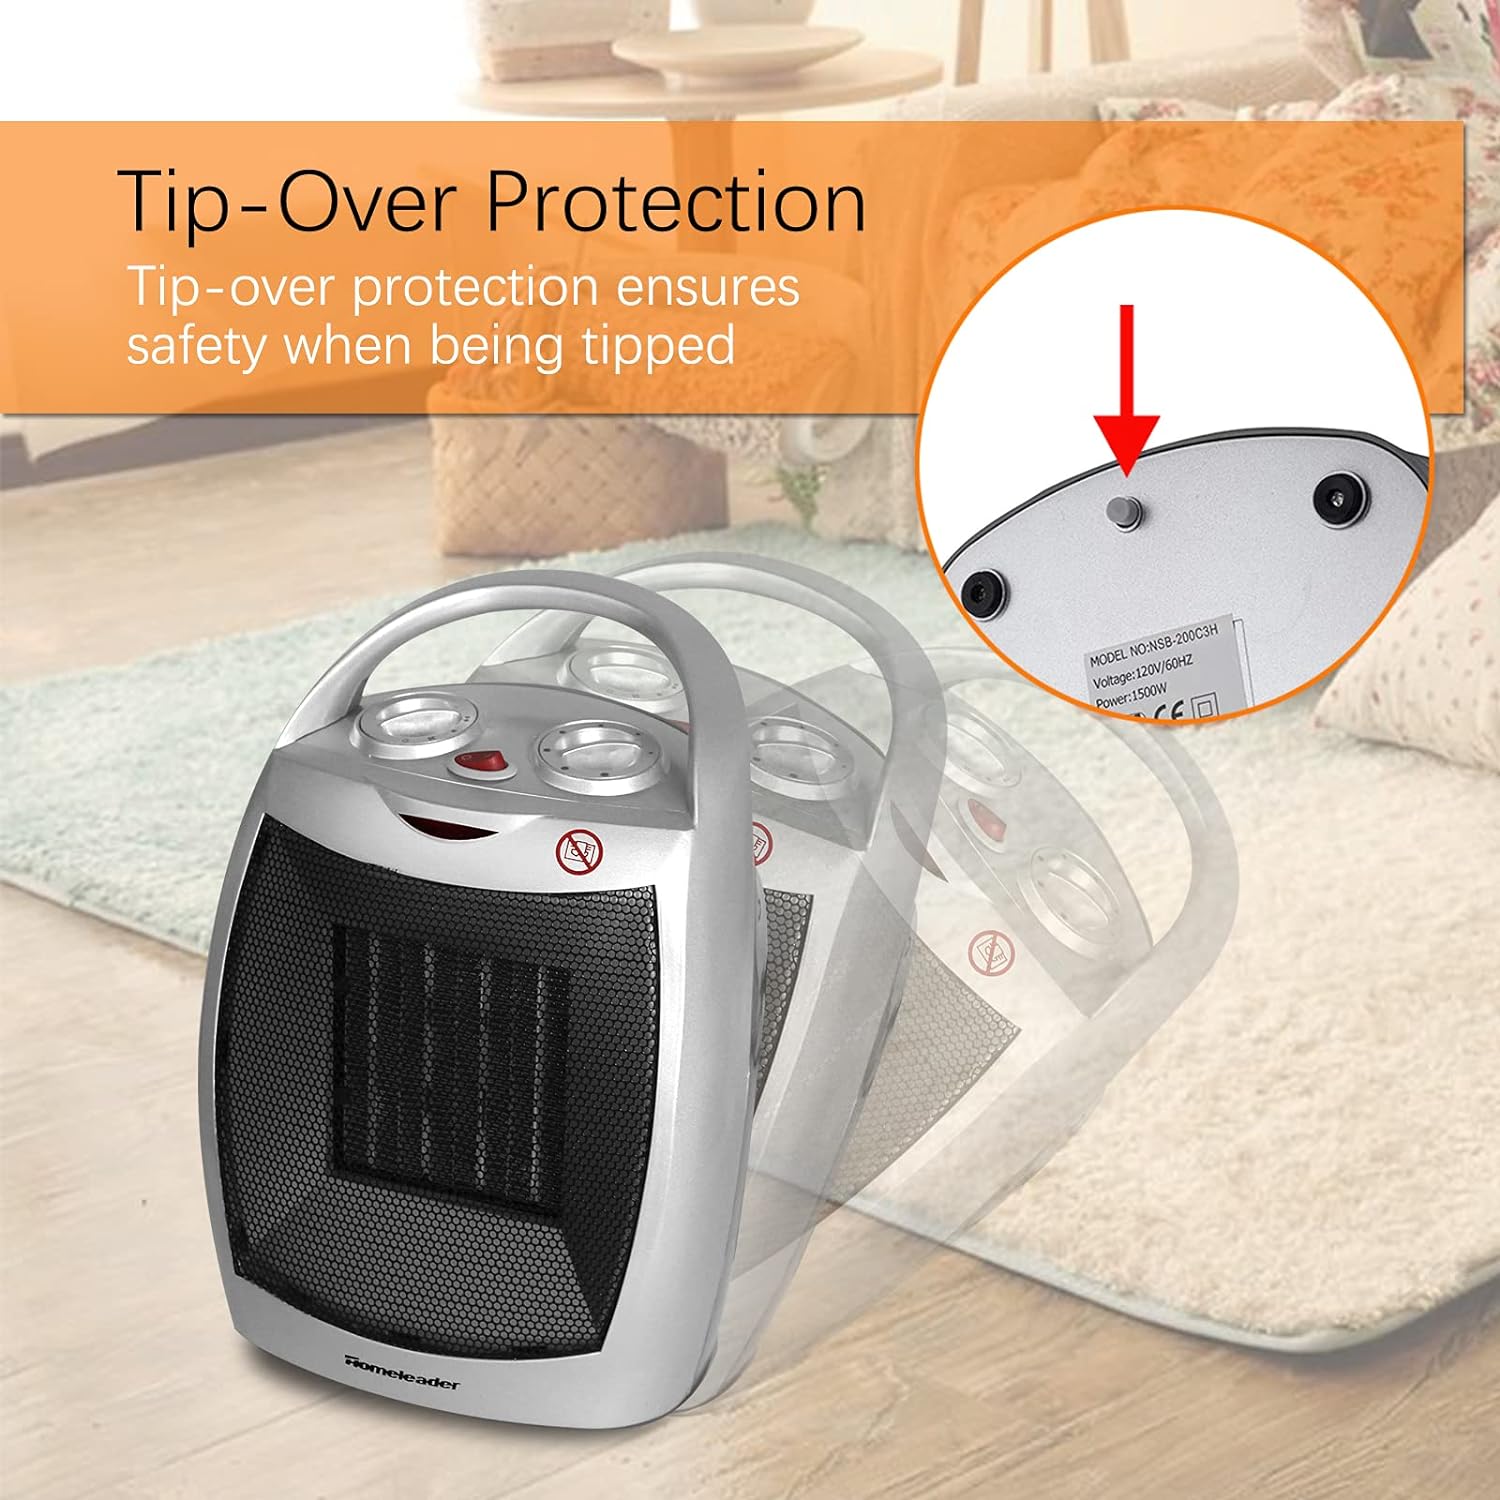 Homeleader Portable Space Heater, Electric Heater with Thermostat, Ceramic Small Heater with Carrying Handle and Tip Over Switch for Home and Office, 750W/1500W